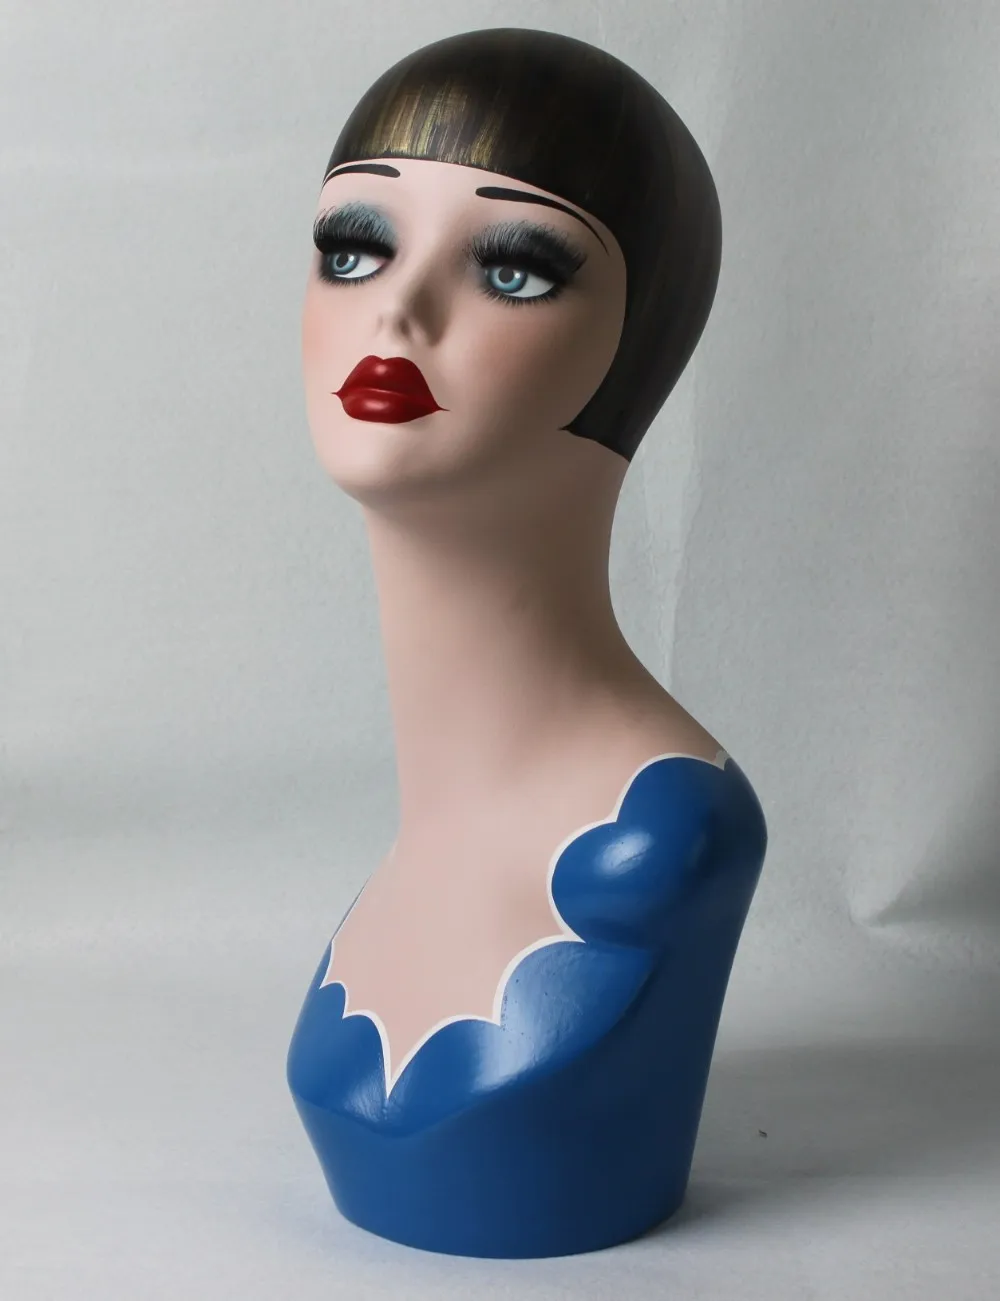 High quality Fiberglass vintage female mannequin dummy head bust for earrings &wigs& hat & jewelry display